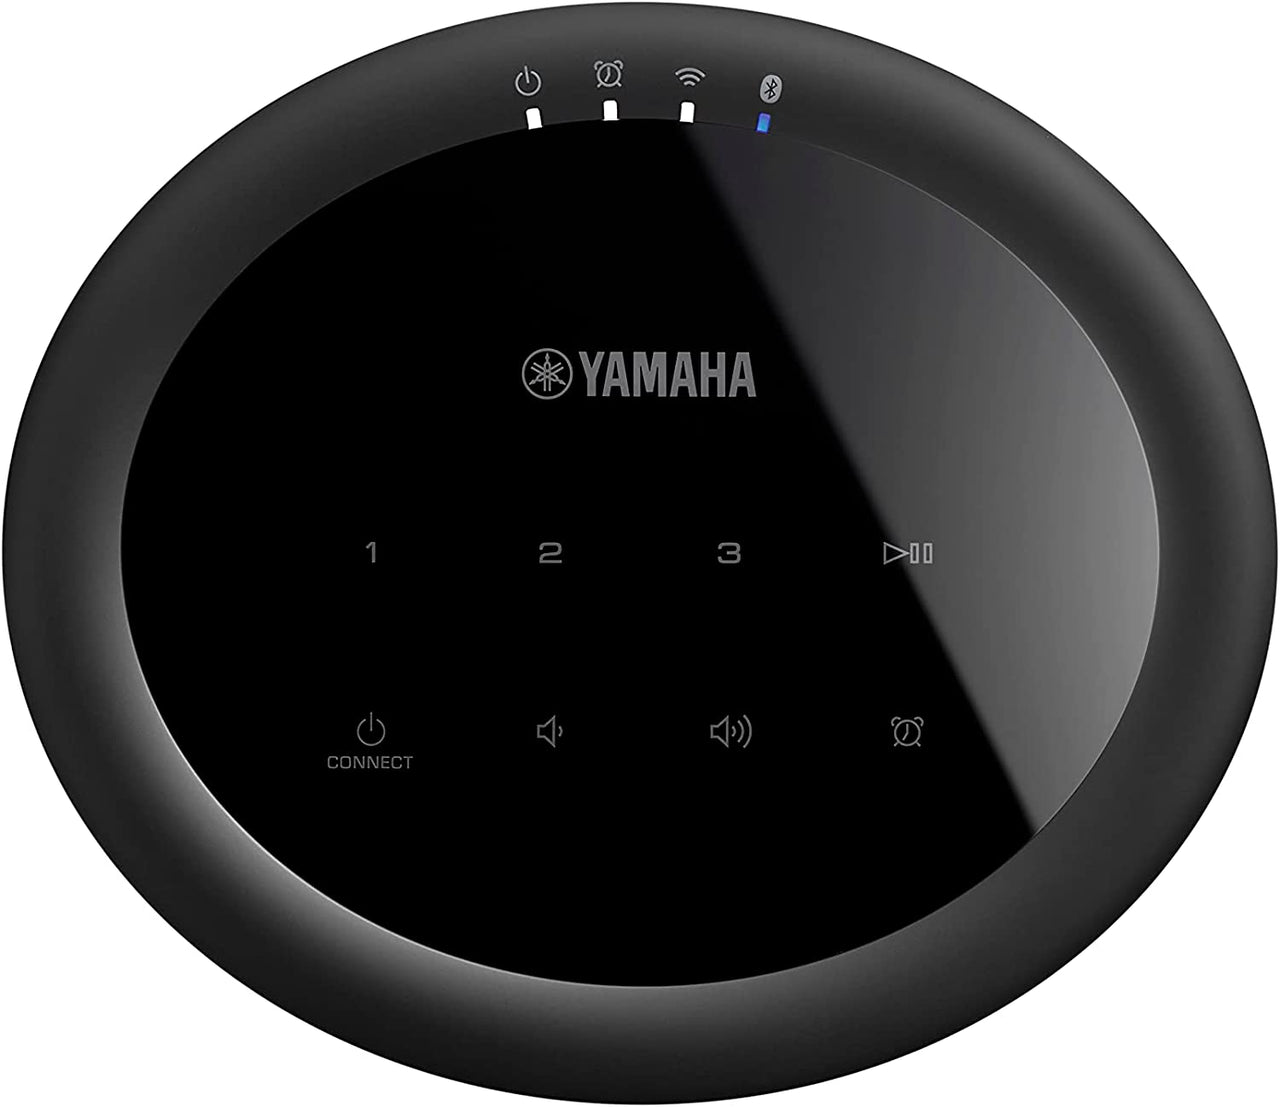 Yamaha WX-021BL MusicCast 20 wireless powered speakers with Wi-Fi, Bluetooth, and Apple AirPlay